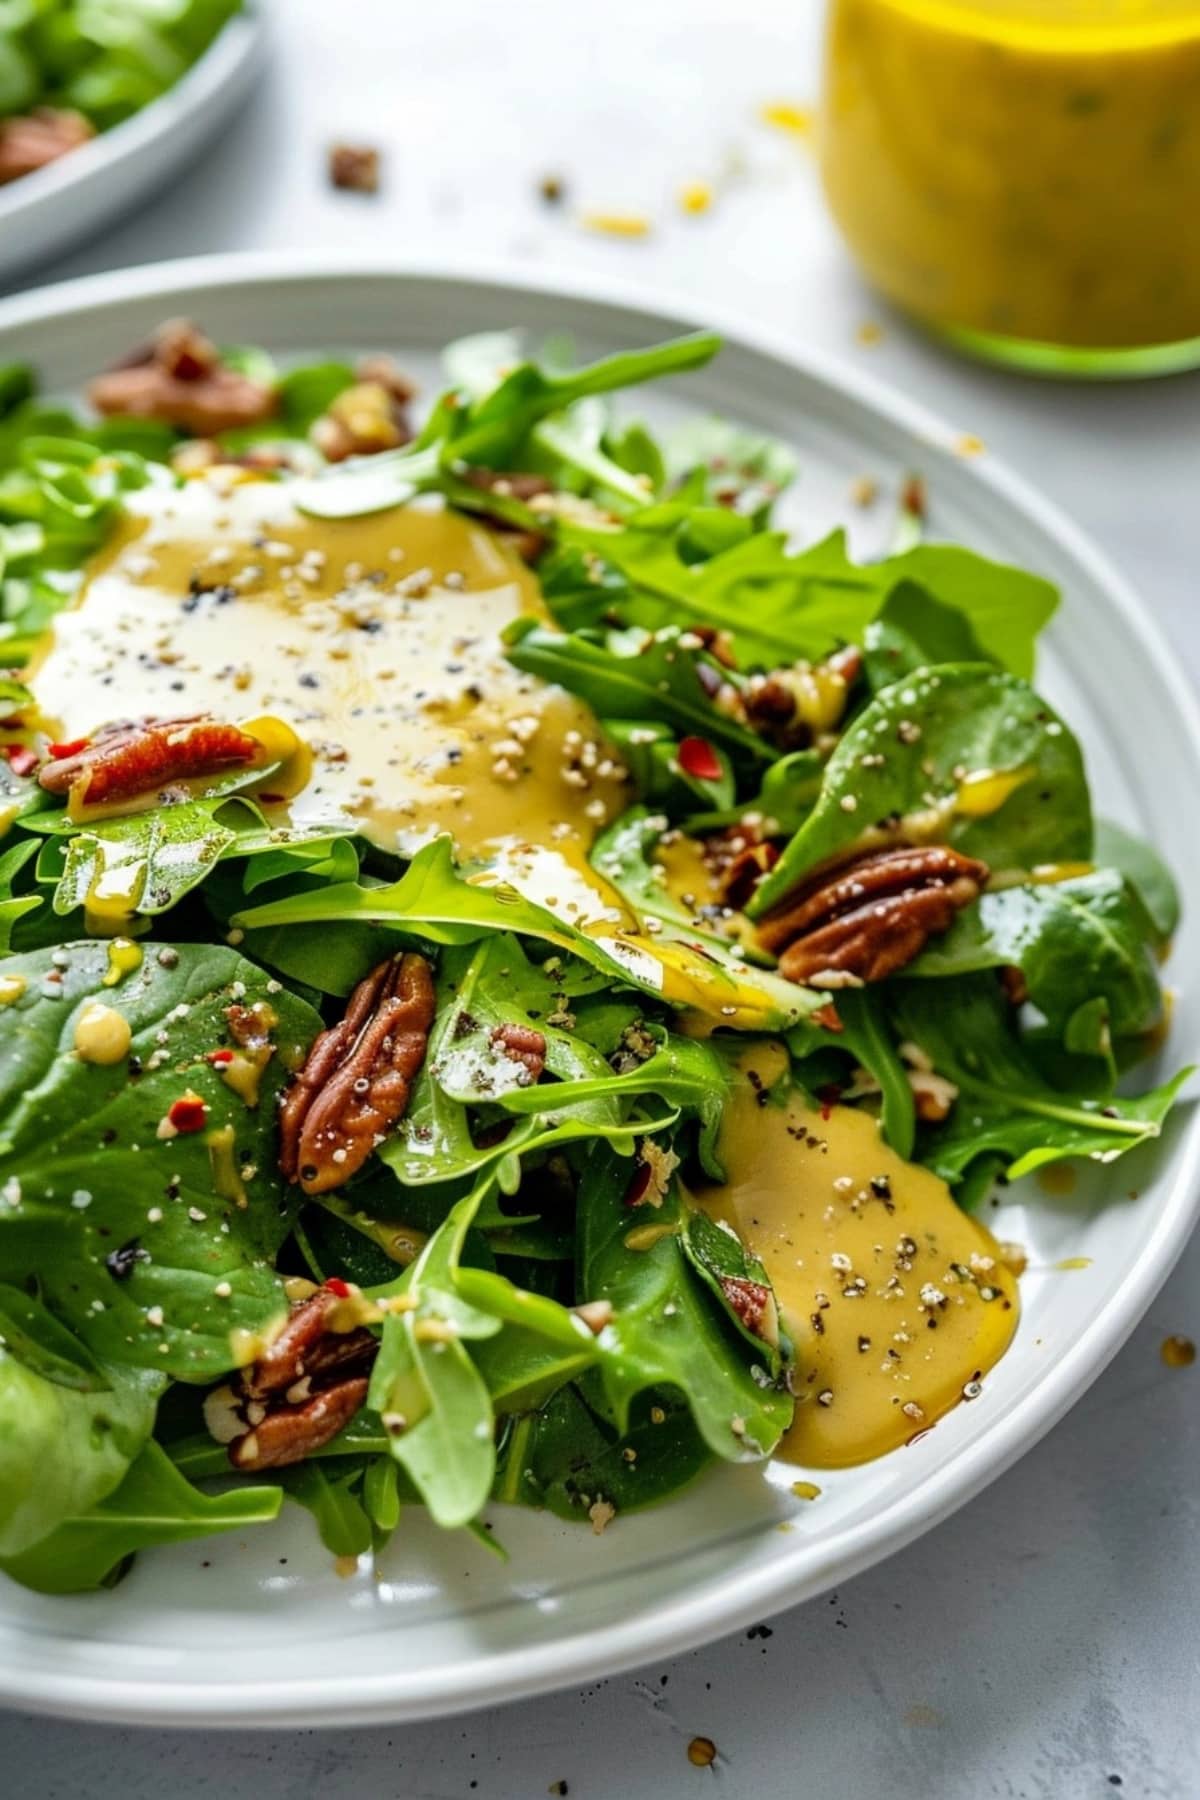 Honey mustard sauce drizzled over green salad in a plate.